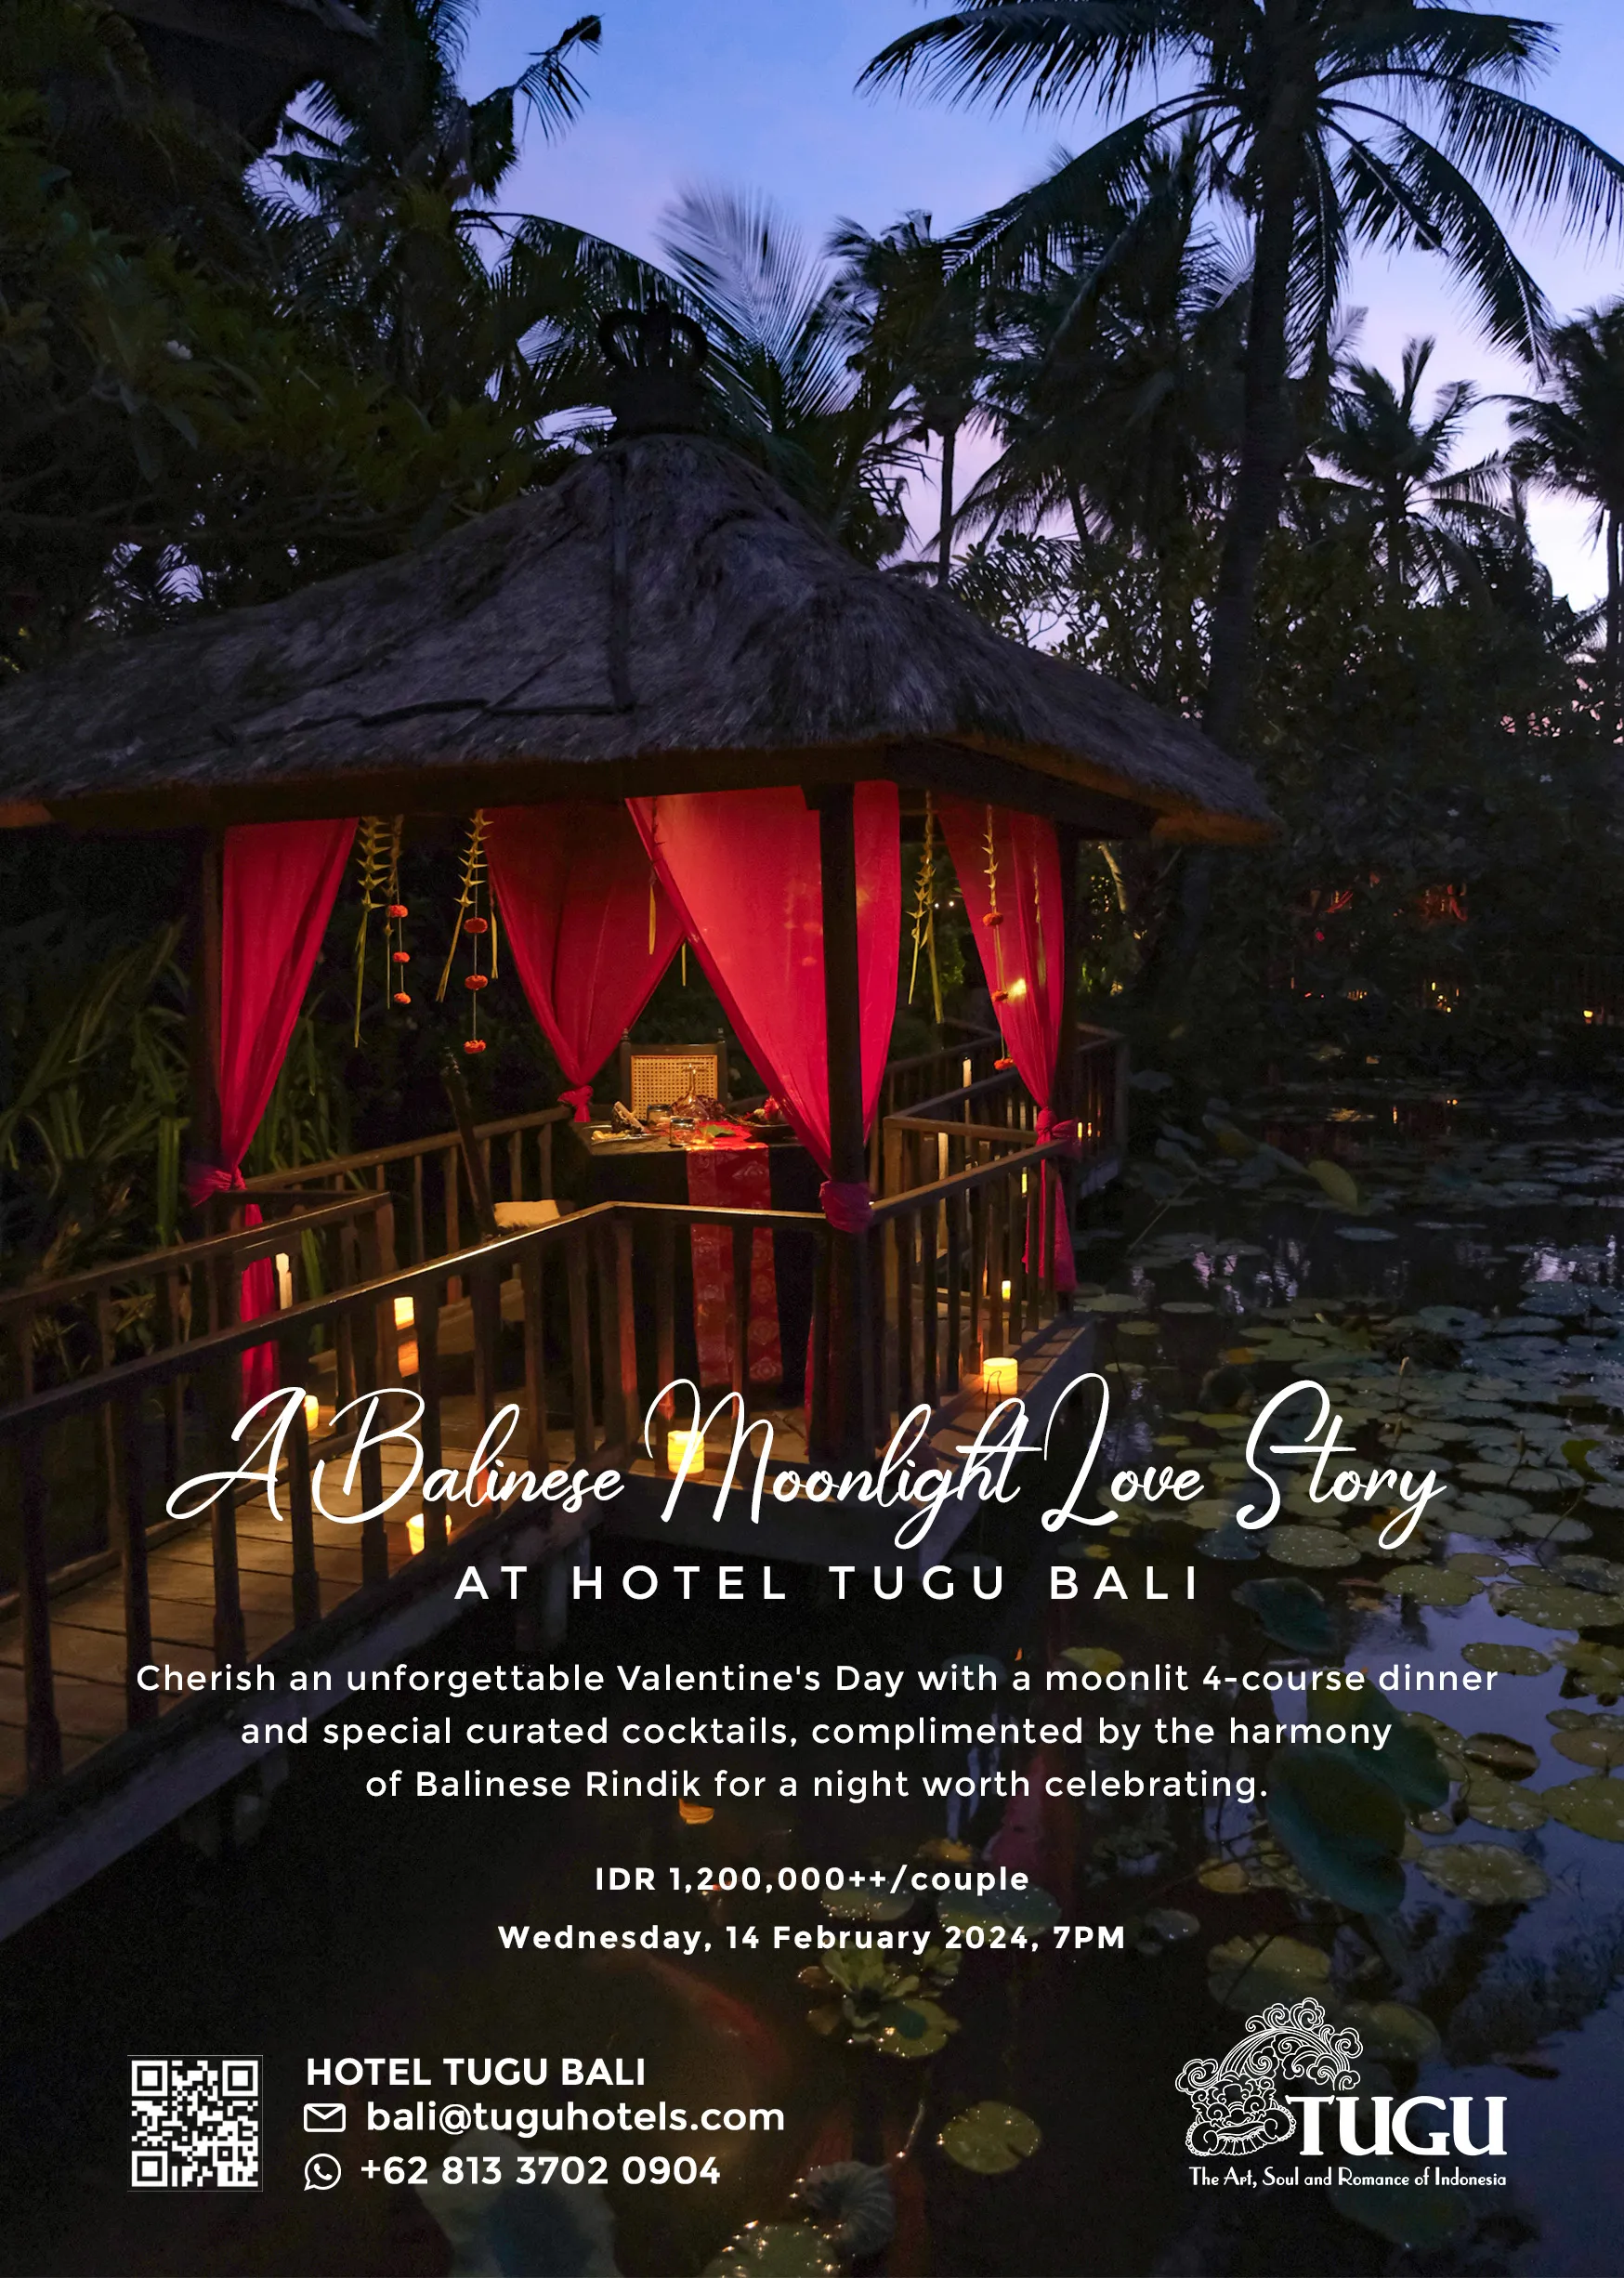 Drink A Balinese Moonlight Love Story: Valentine's Day Dinner 17230